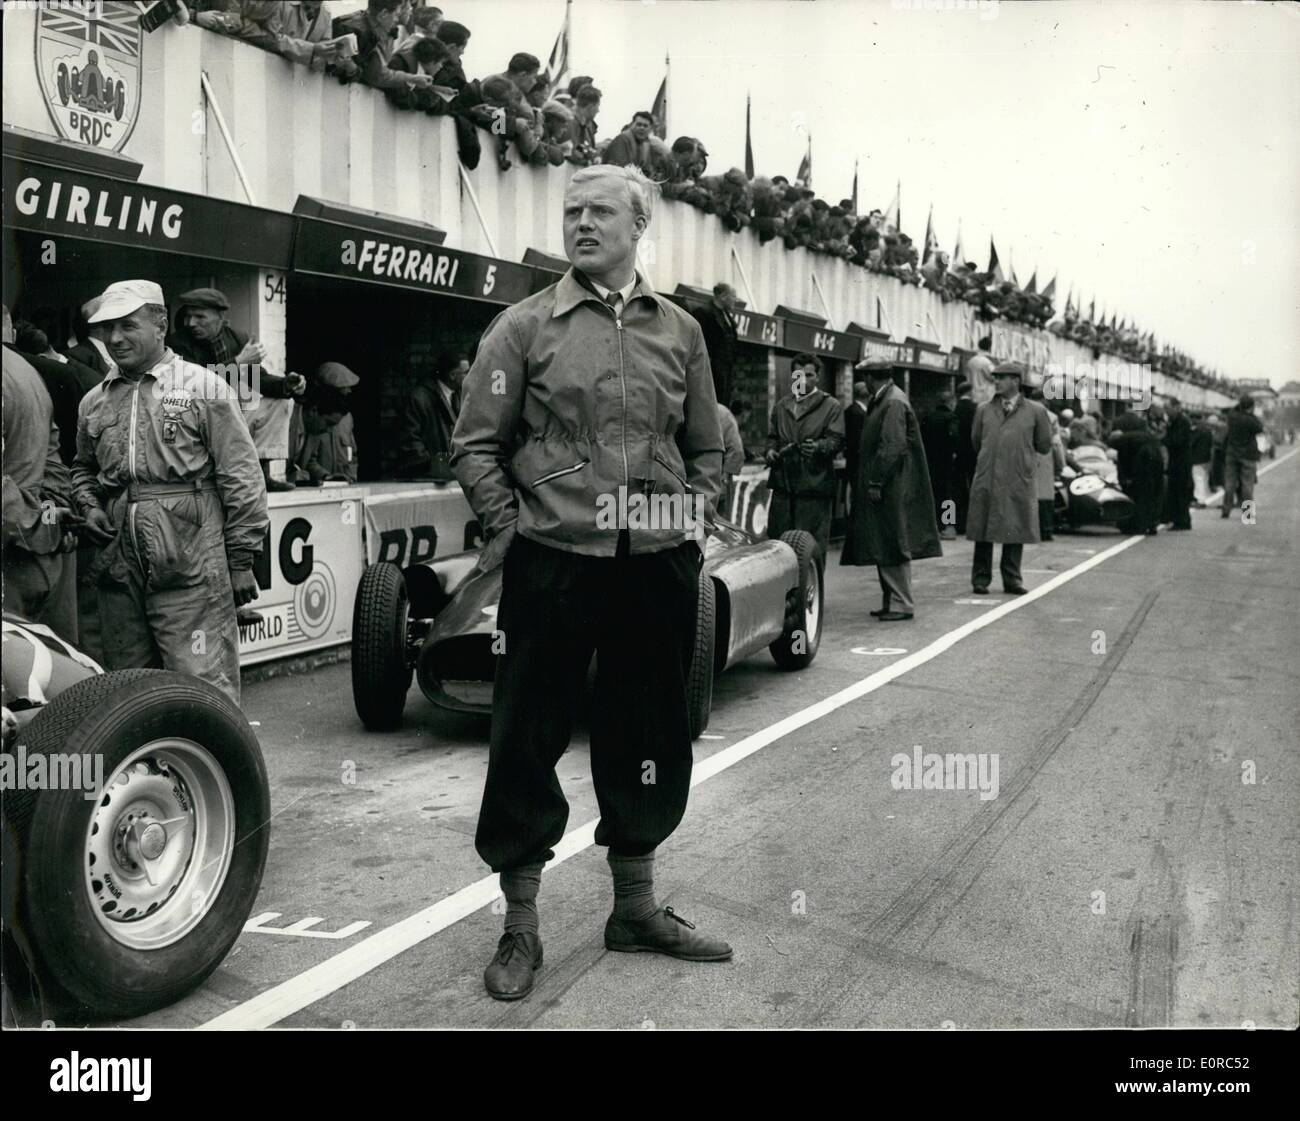 Jan. 01, 1959 - Mike Hawthorn killed when car hits tree flashback - Silverstone 1956: Mike Hawthorn, Britain US world champion racing driver died yesterday when his Jaguar car skidded on the wet road and crashed into a tree near Guildford, Surrey. He was only 29 and retired holding the championship title. Photo shows Silverstone 1956 - Mike Hawthorn stands on the track - wtih a background of racing cars and pits. Stock Photo